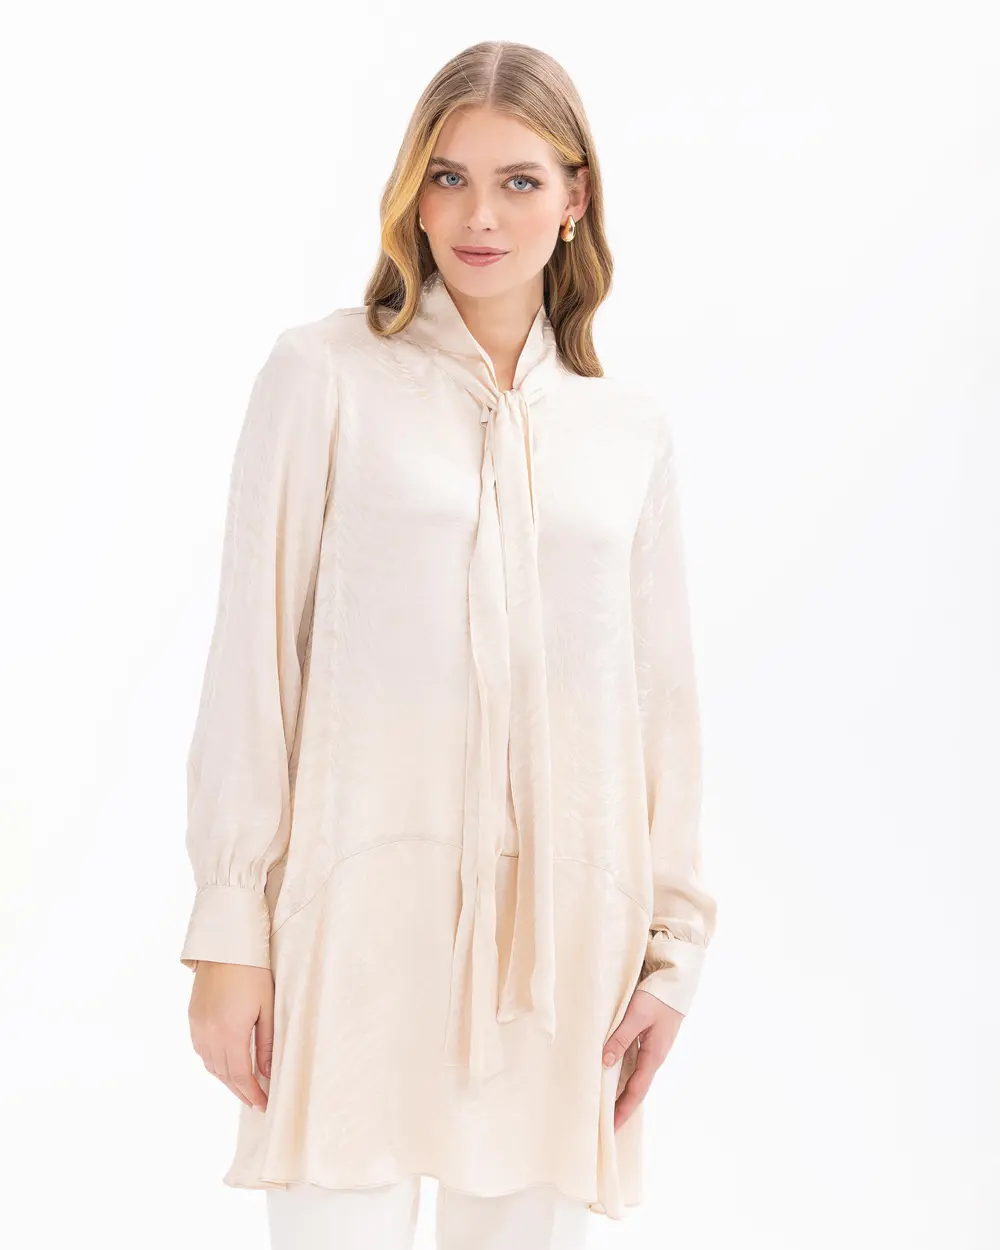 Woven Fabric Tunic with Scarf Collar